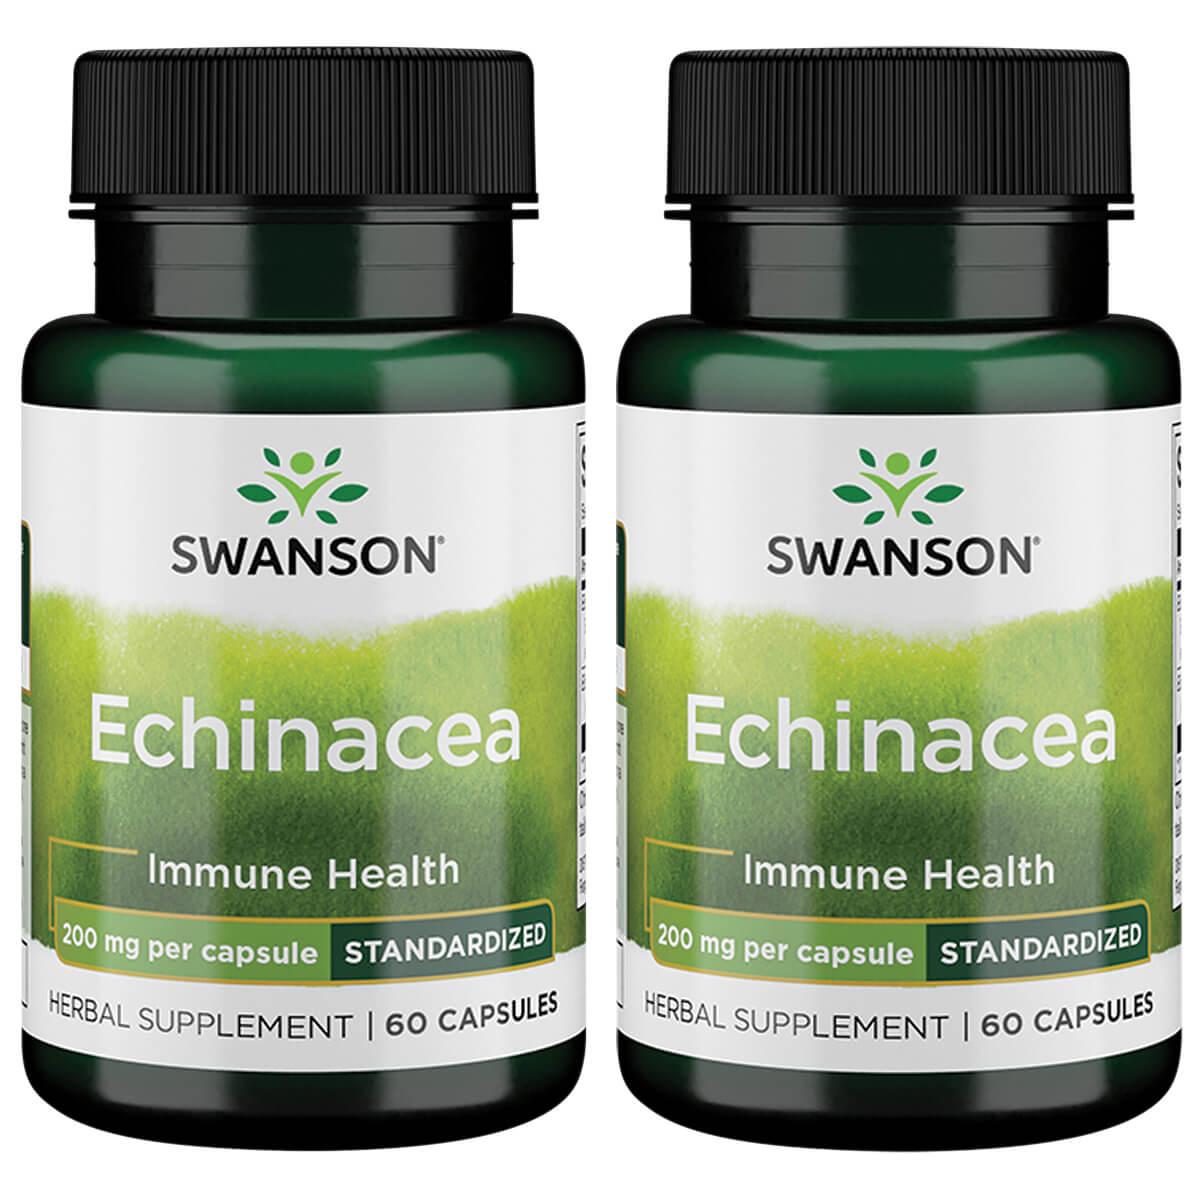 Swanson Superior Herbs Echinacea - Standardized 2 Pack Vitamin 200 mg 60 Caps Herbs and Supplements